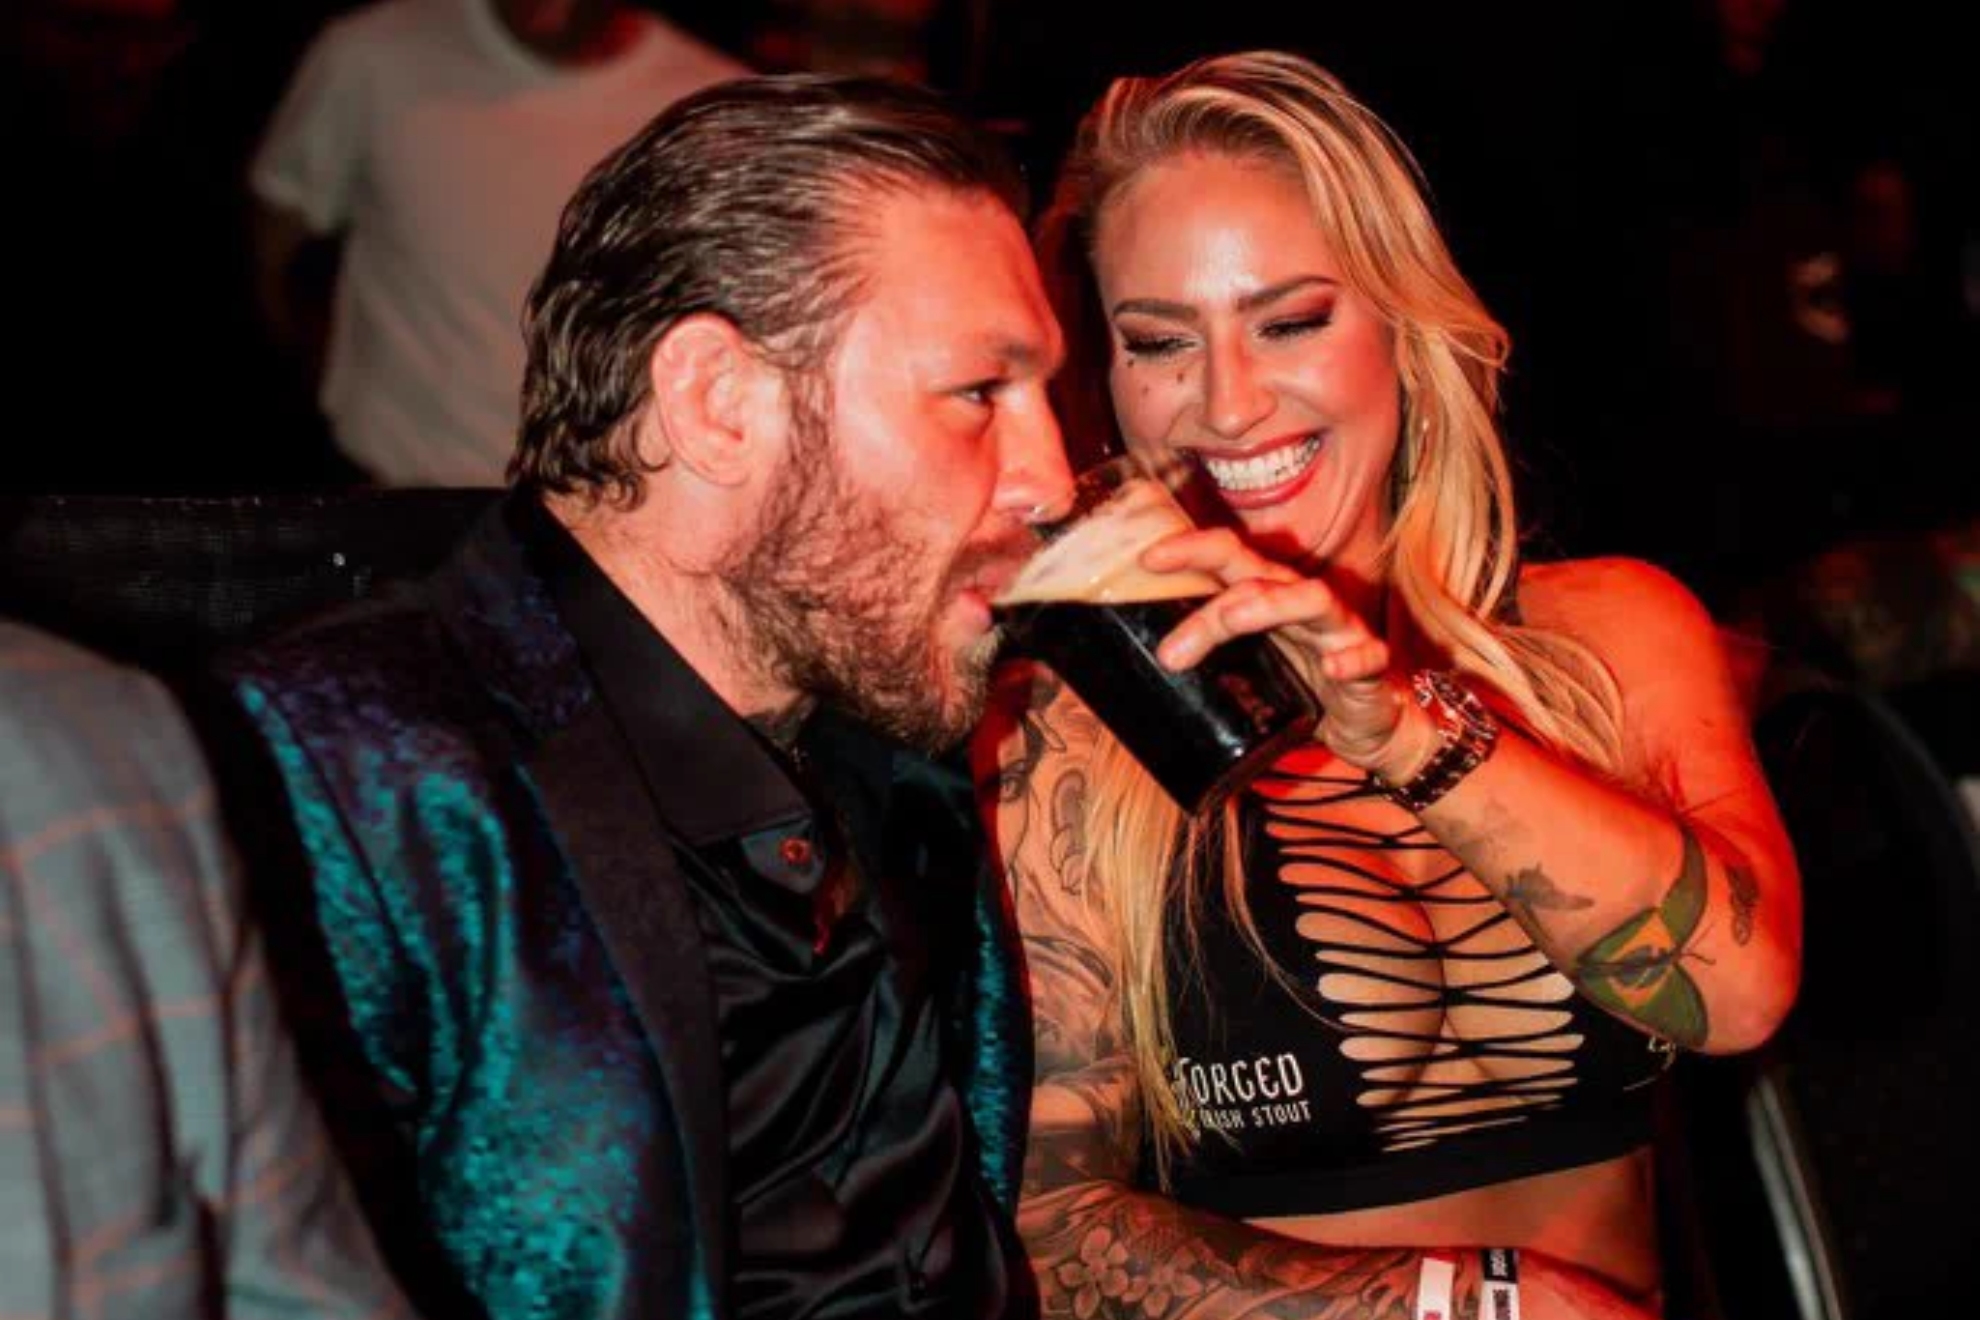 Conor McGregor taking some stout beer from Ebanie Bridges